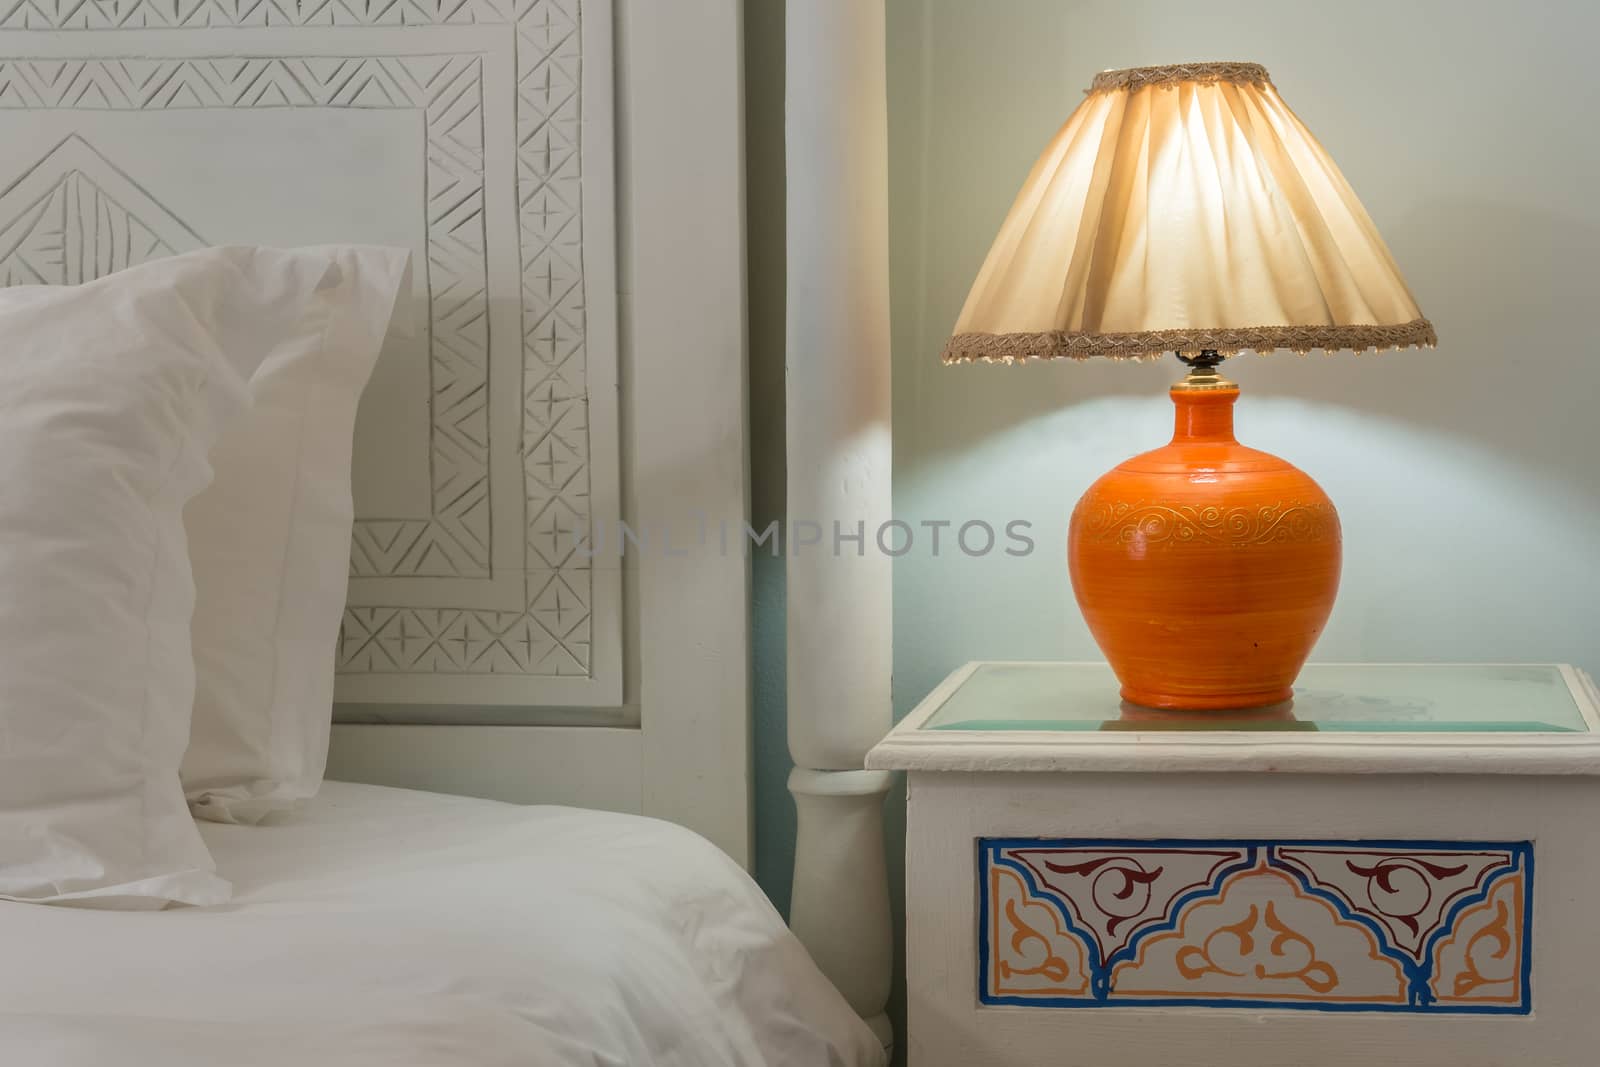 A lamp on a nightstand next to a bed with a white carved headboard